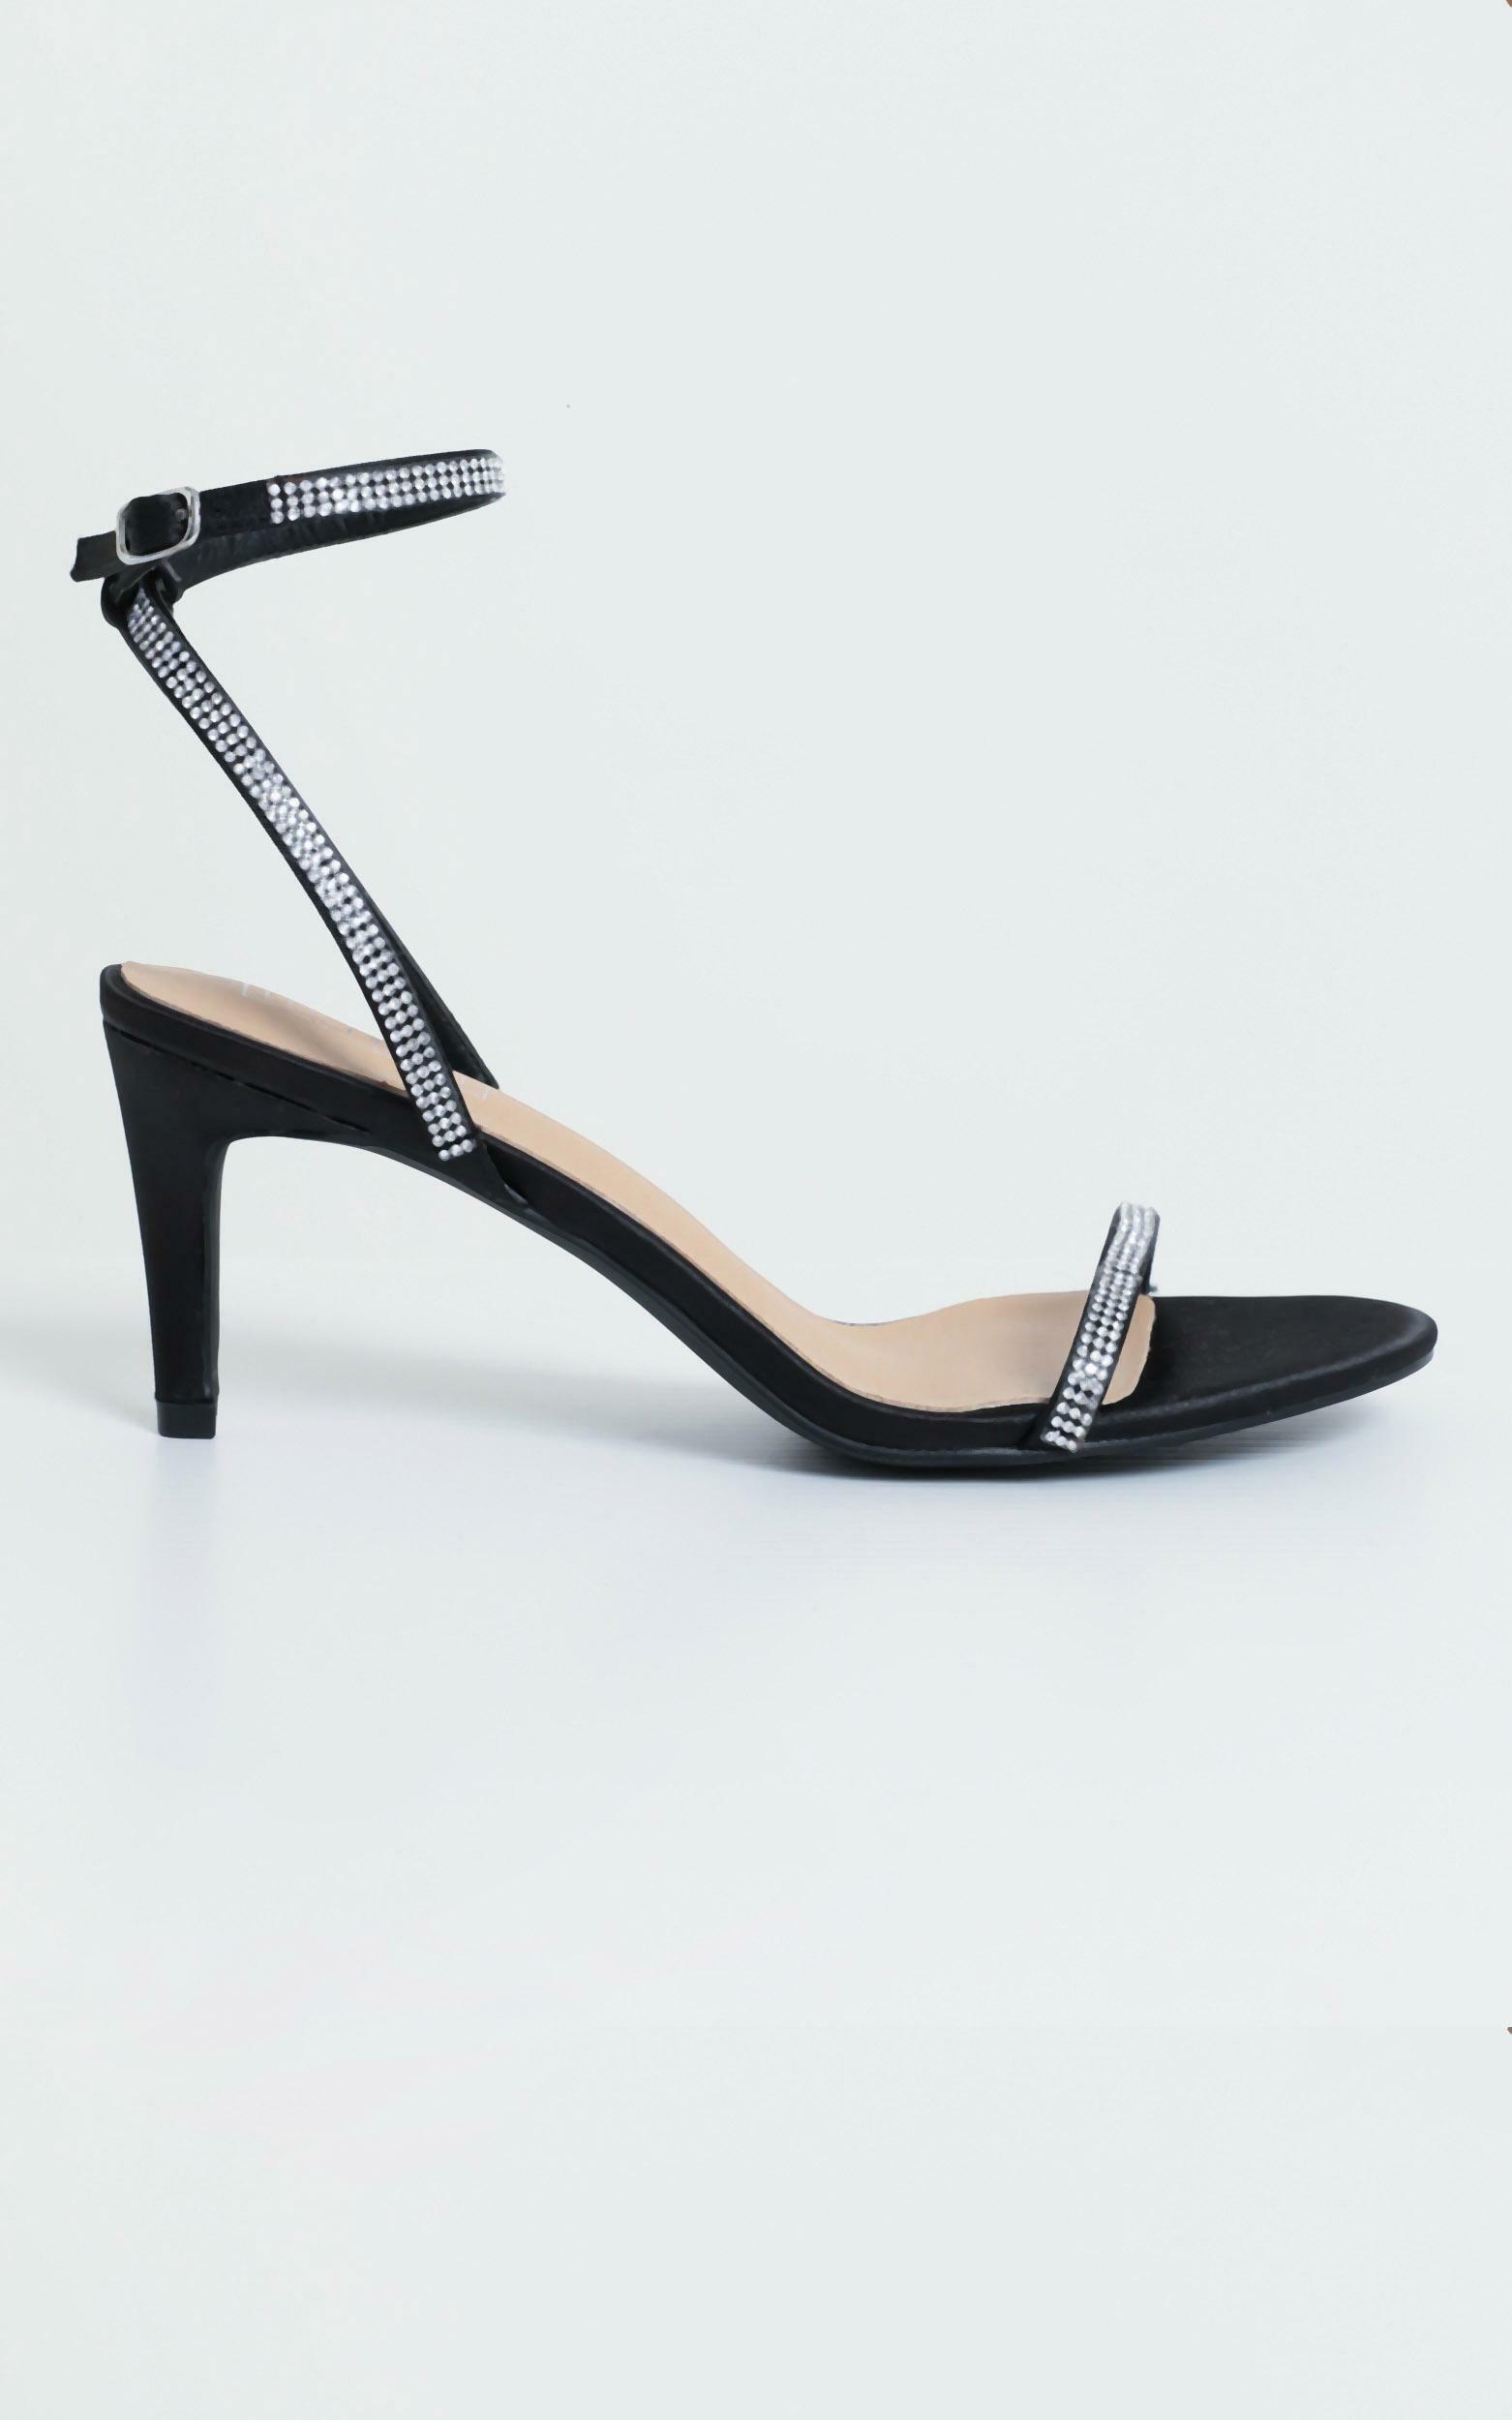 Therapy - Glimmer Heels in Black Suedette - 05, BLK1, hi-res image number null